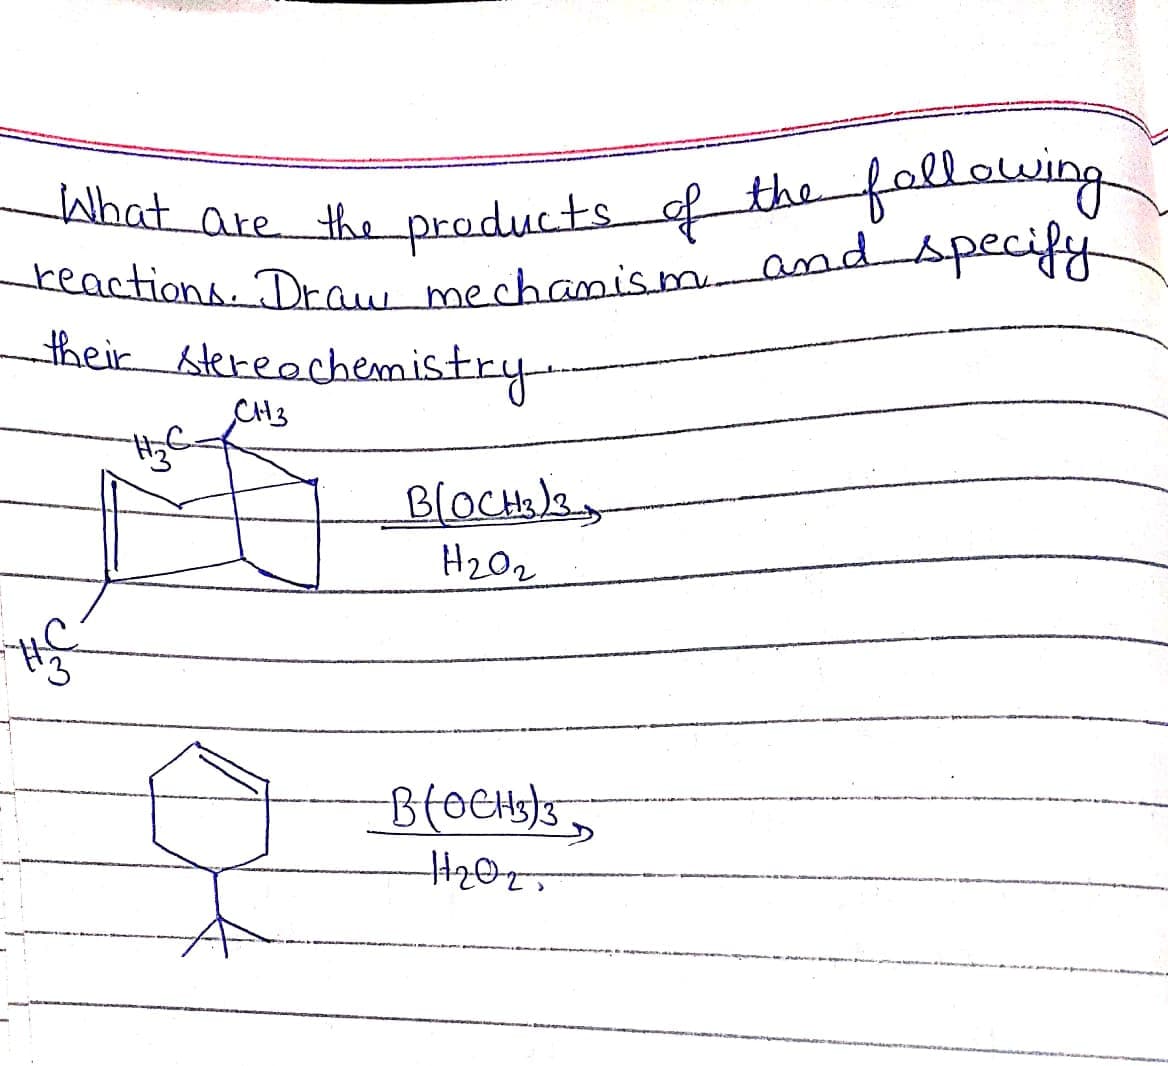 reactions. Draw mechanis.mandspecify
What are the products
fallowing
the
their slereachemistry
CH3
H202
